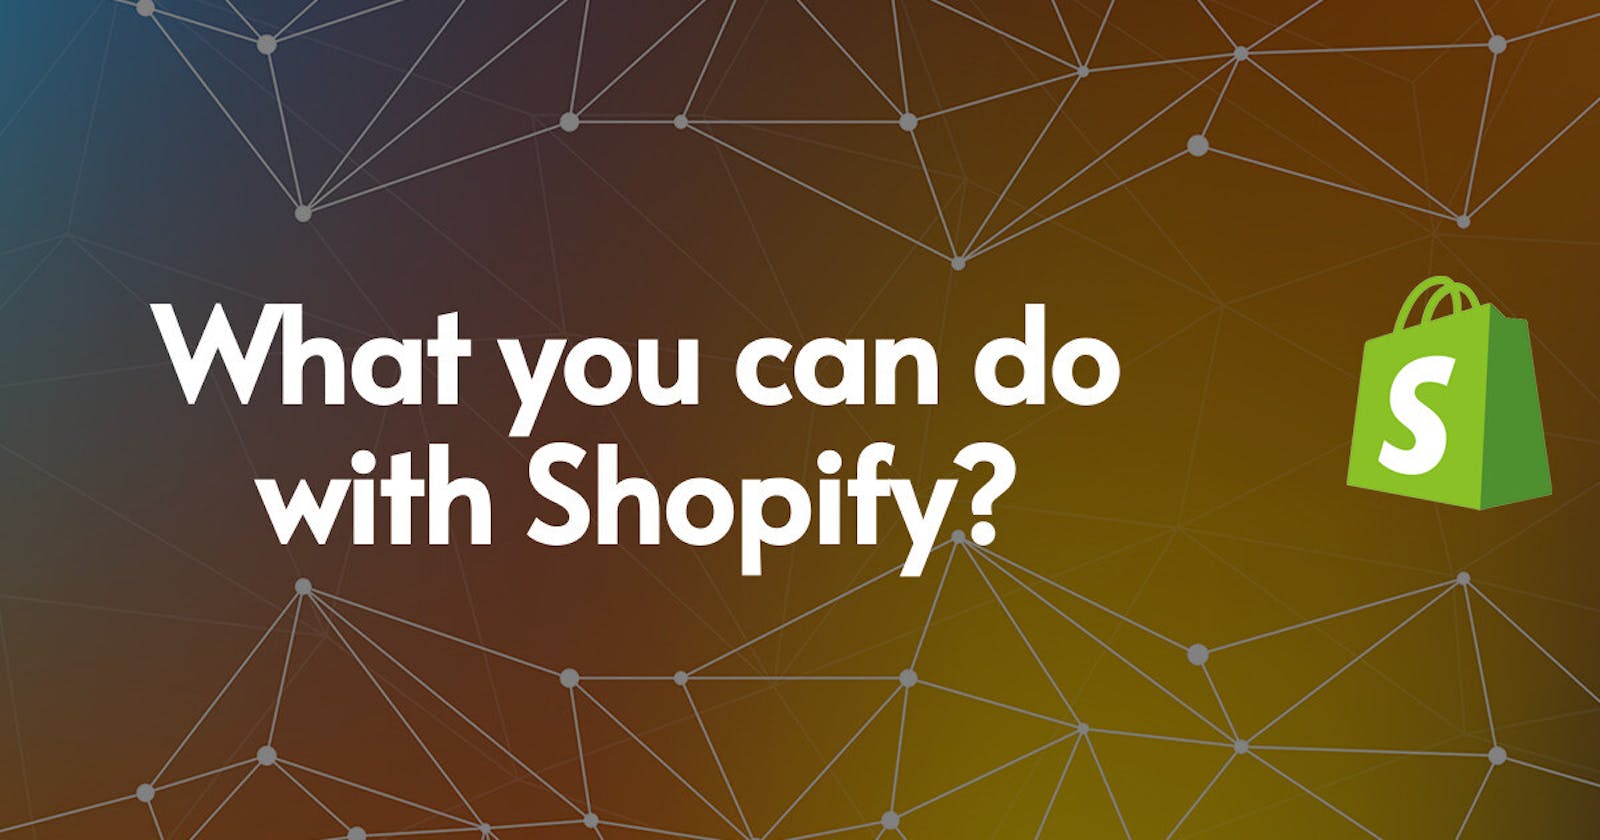 What you can do with Shopify?